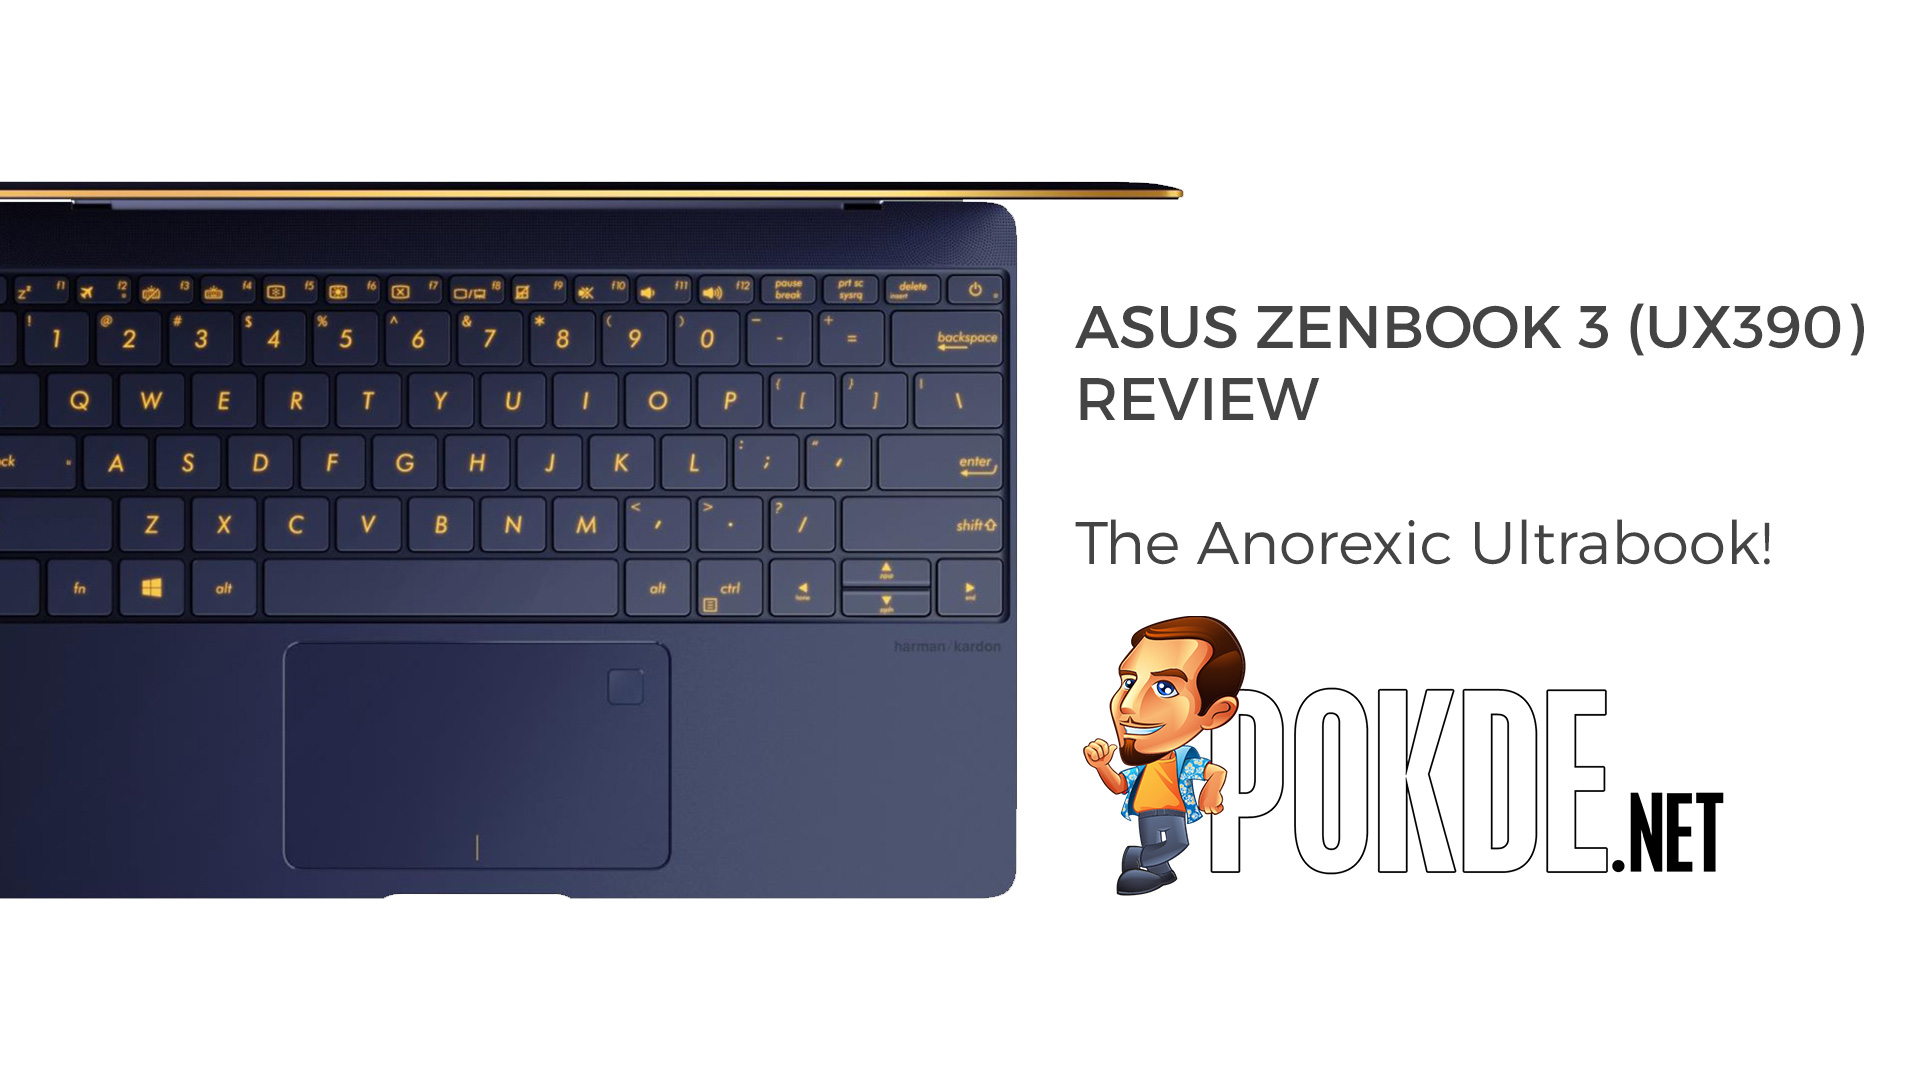 Asus ZenBook 3 (UX390) Review - The Anorexic Ultrabook 29